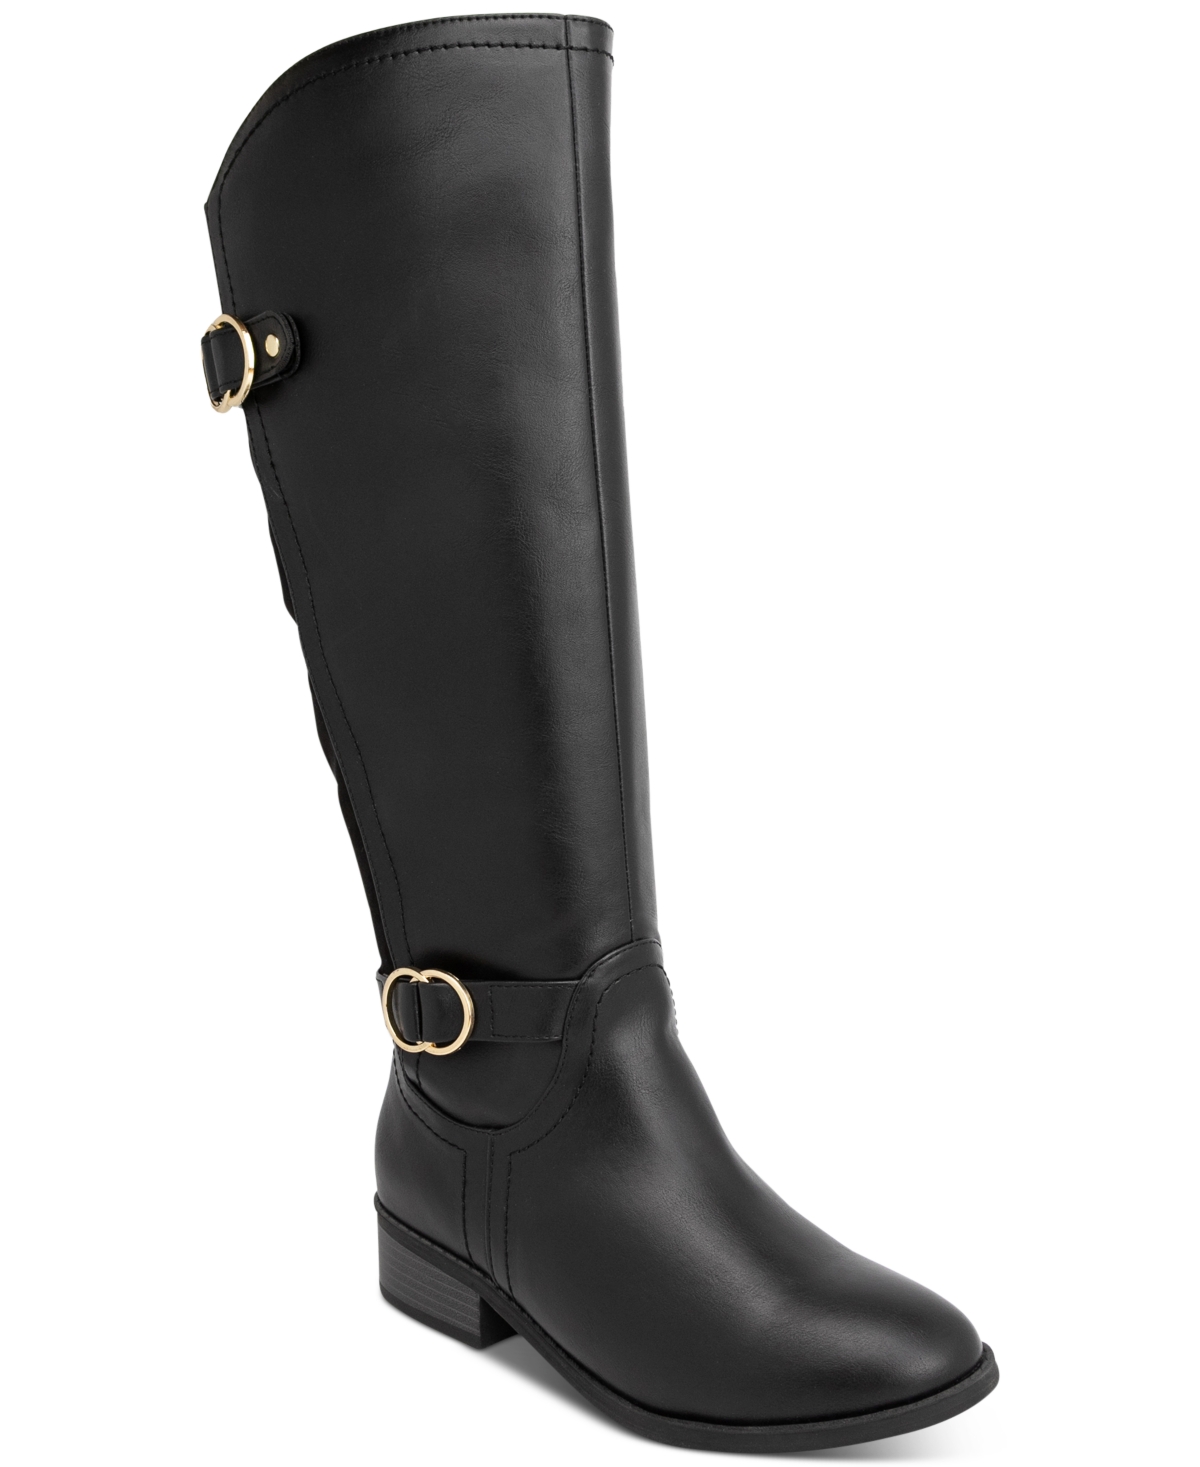 Leandraa Riding Boots, Created for Macy's - Black